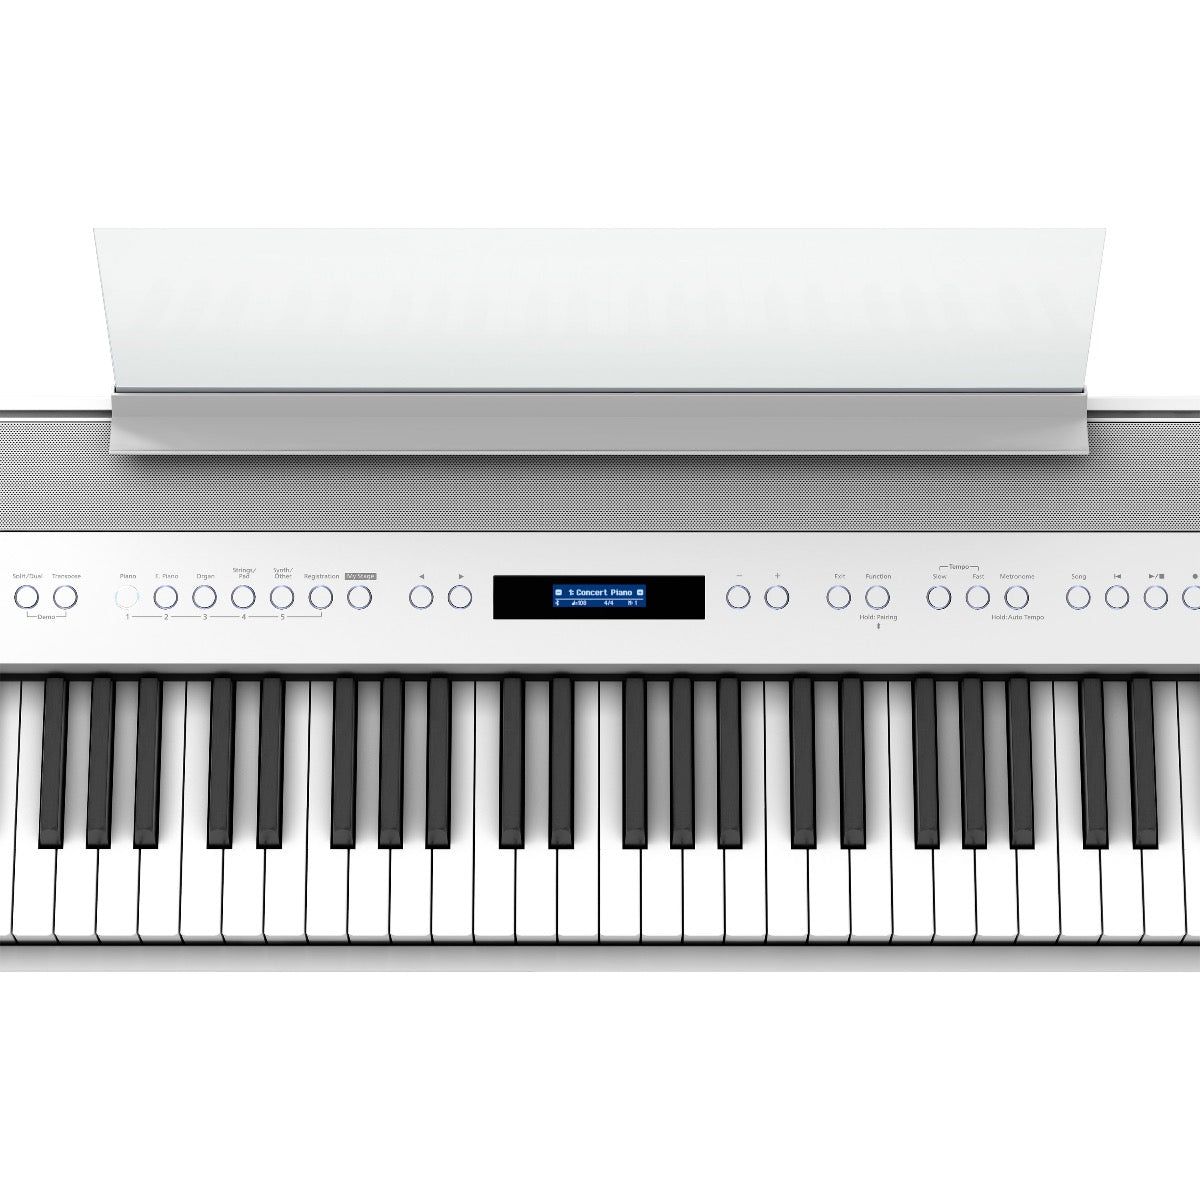 Close-up top view of Roland FP-60X Digital Piano - White showing control panel and portion of keyboard